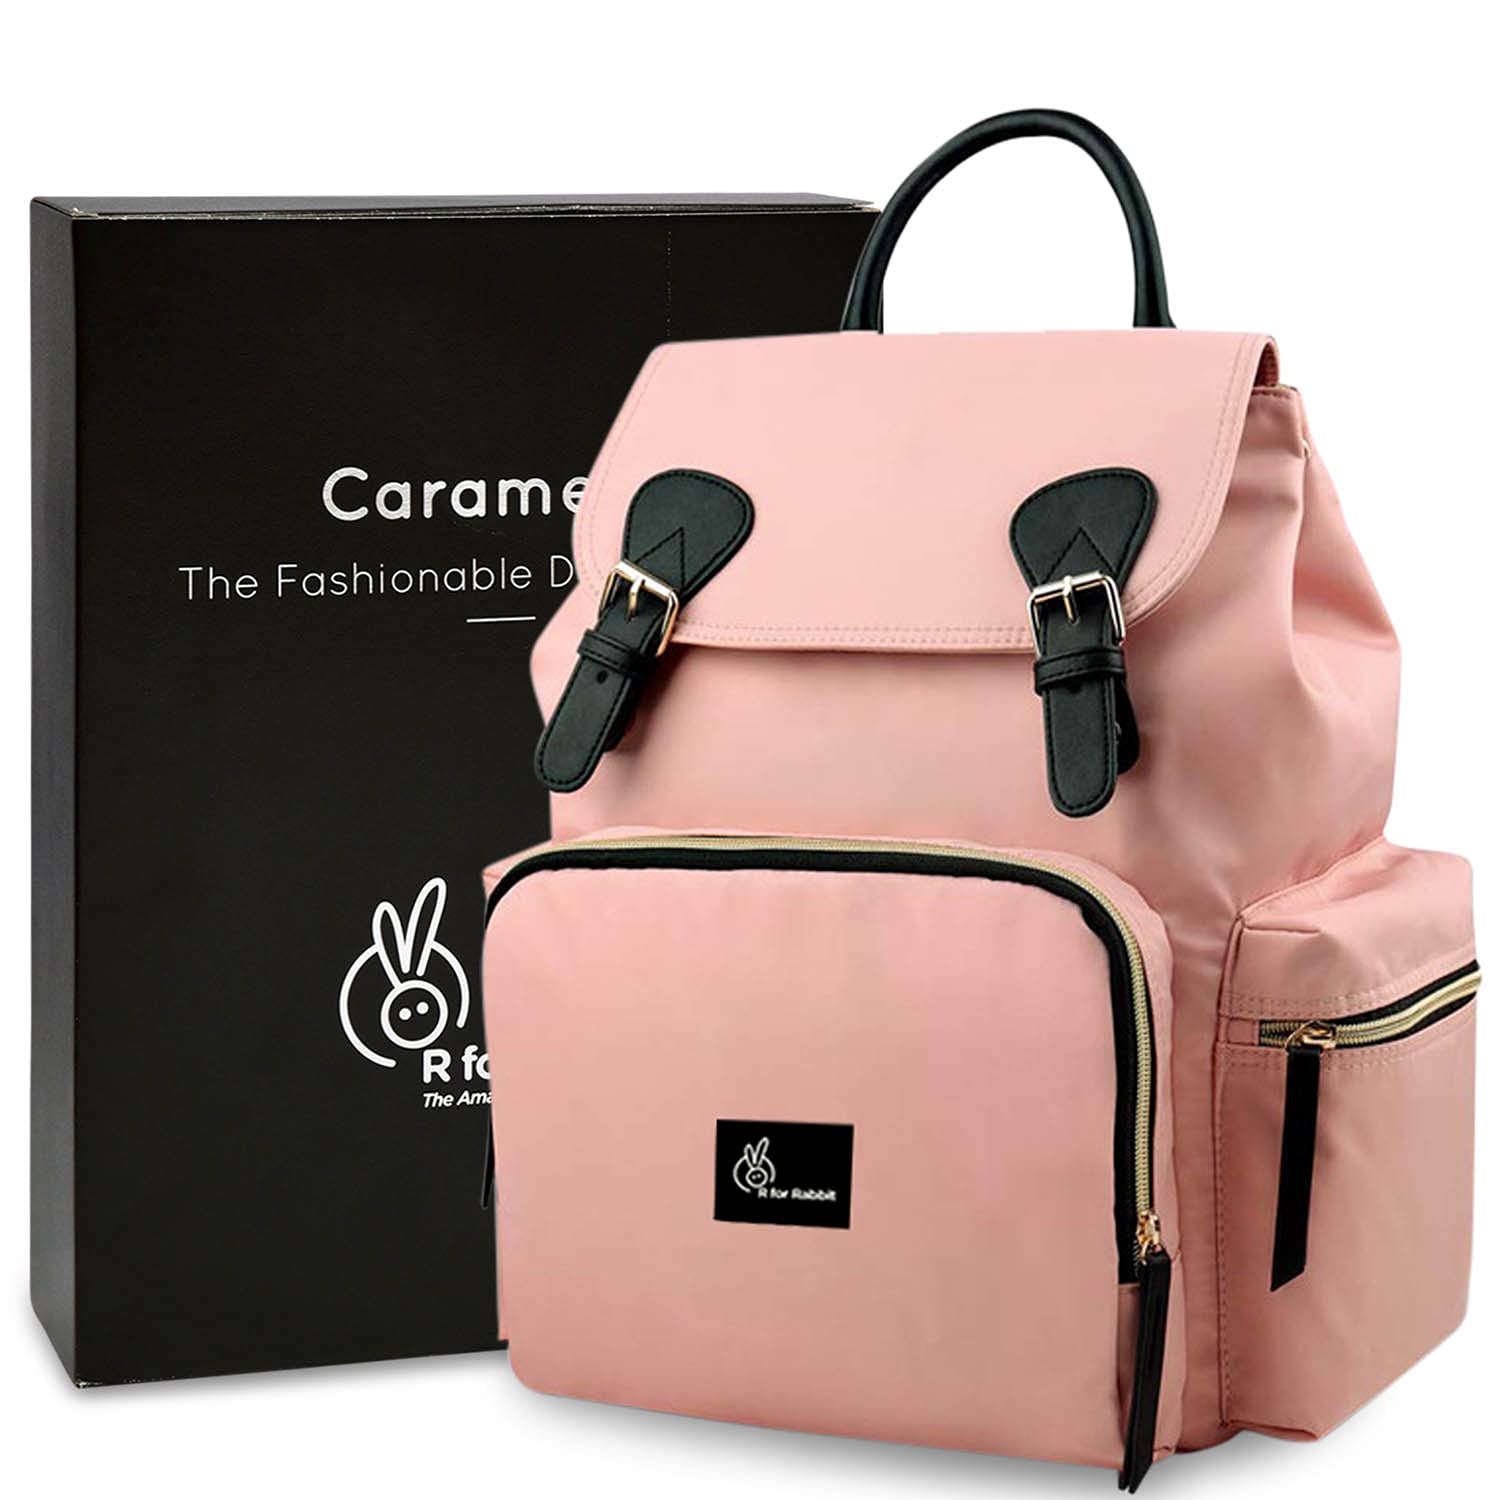 R for Rabbit Caramello Bliss Diaper Bag- Pink - DBCMBP1